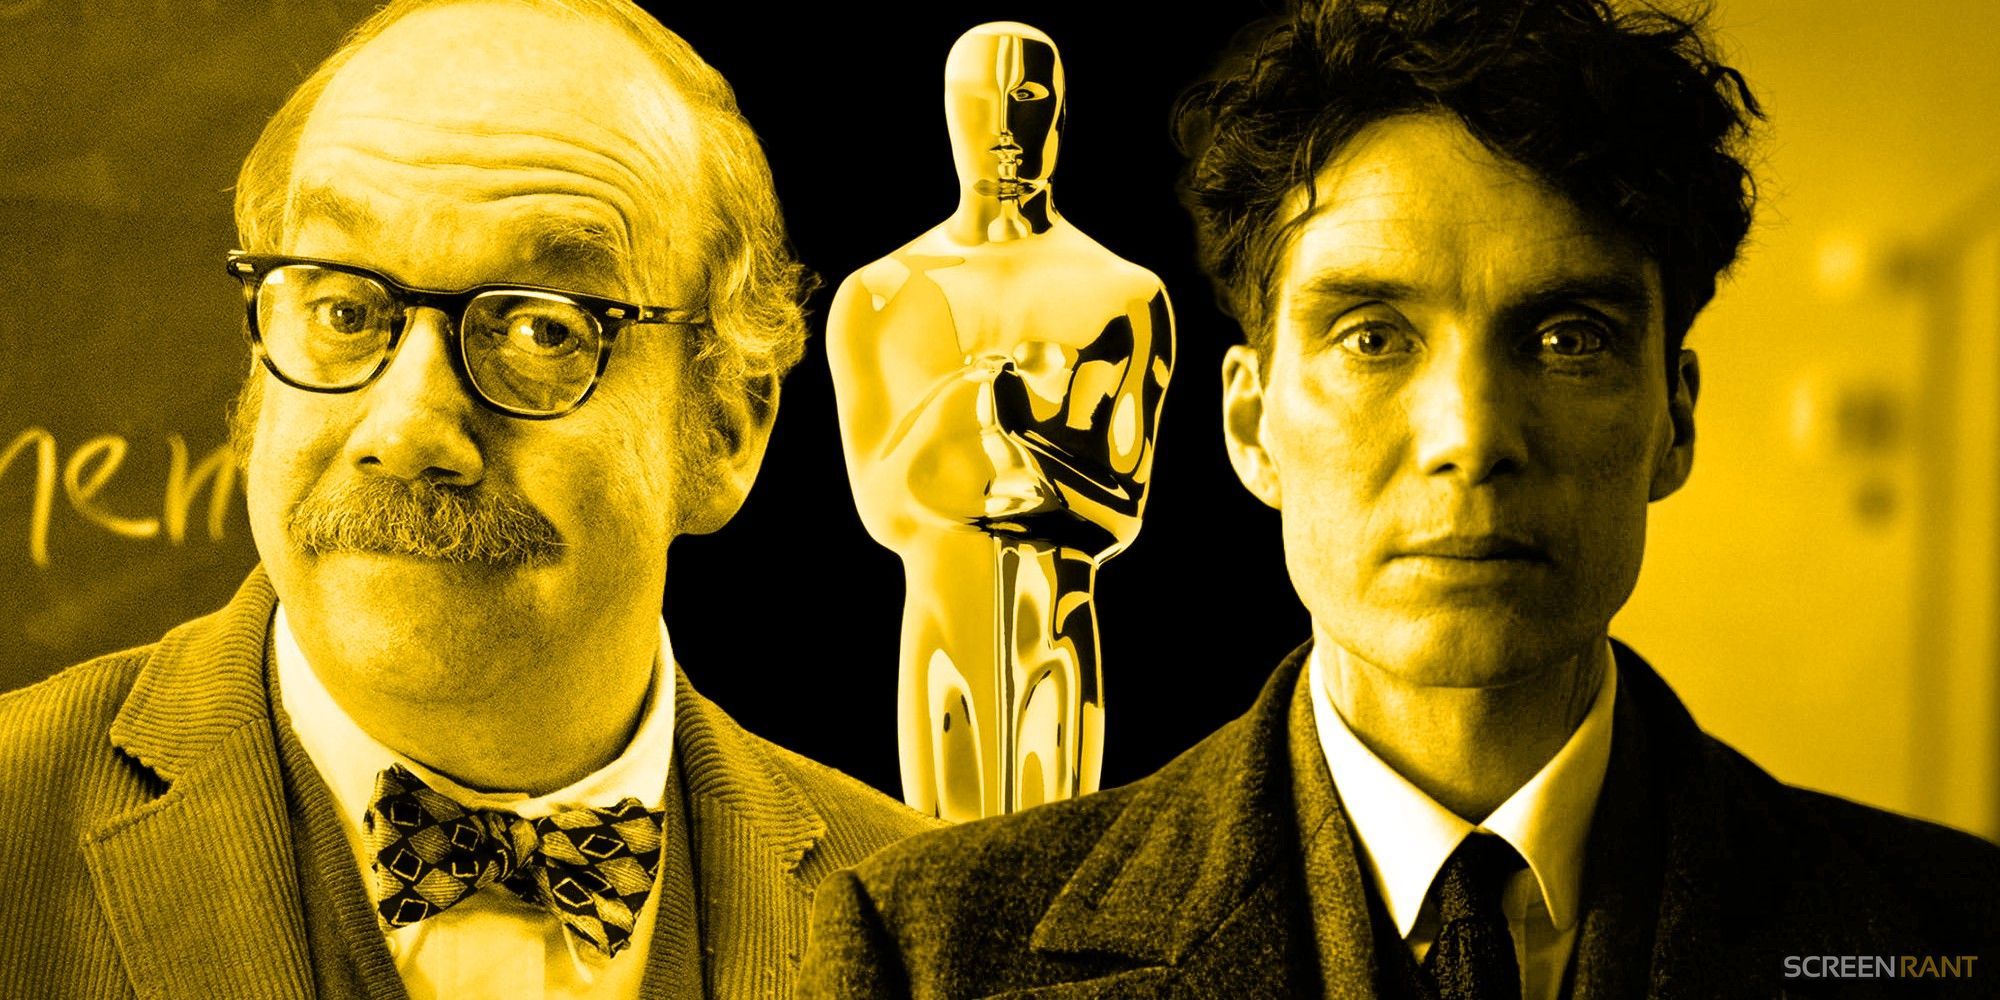 Paul Giamatti in The Holdovers and Cillian Murphy in Oppenheimer with Oscars statue